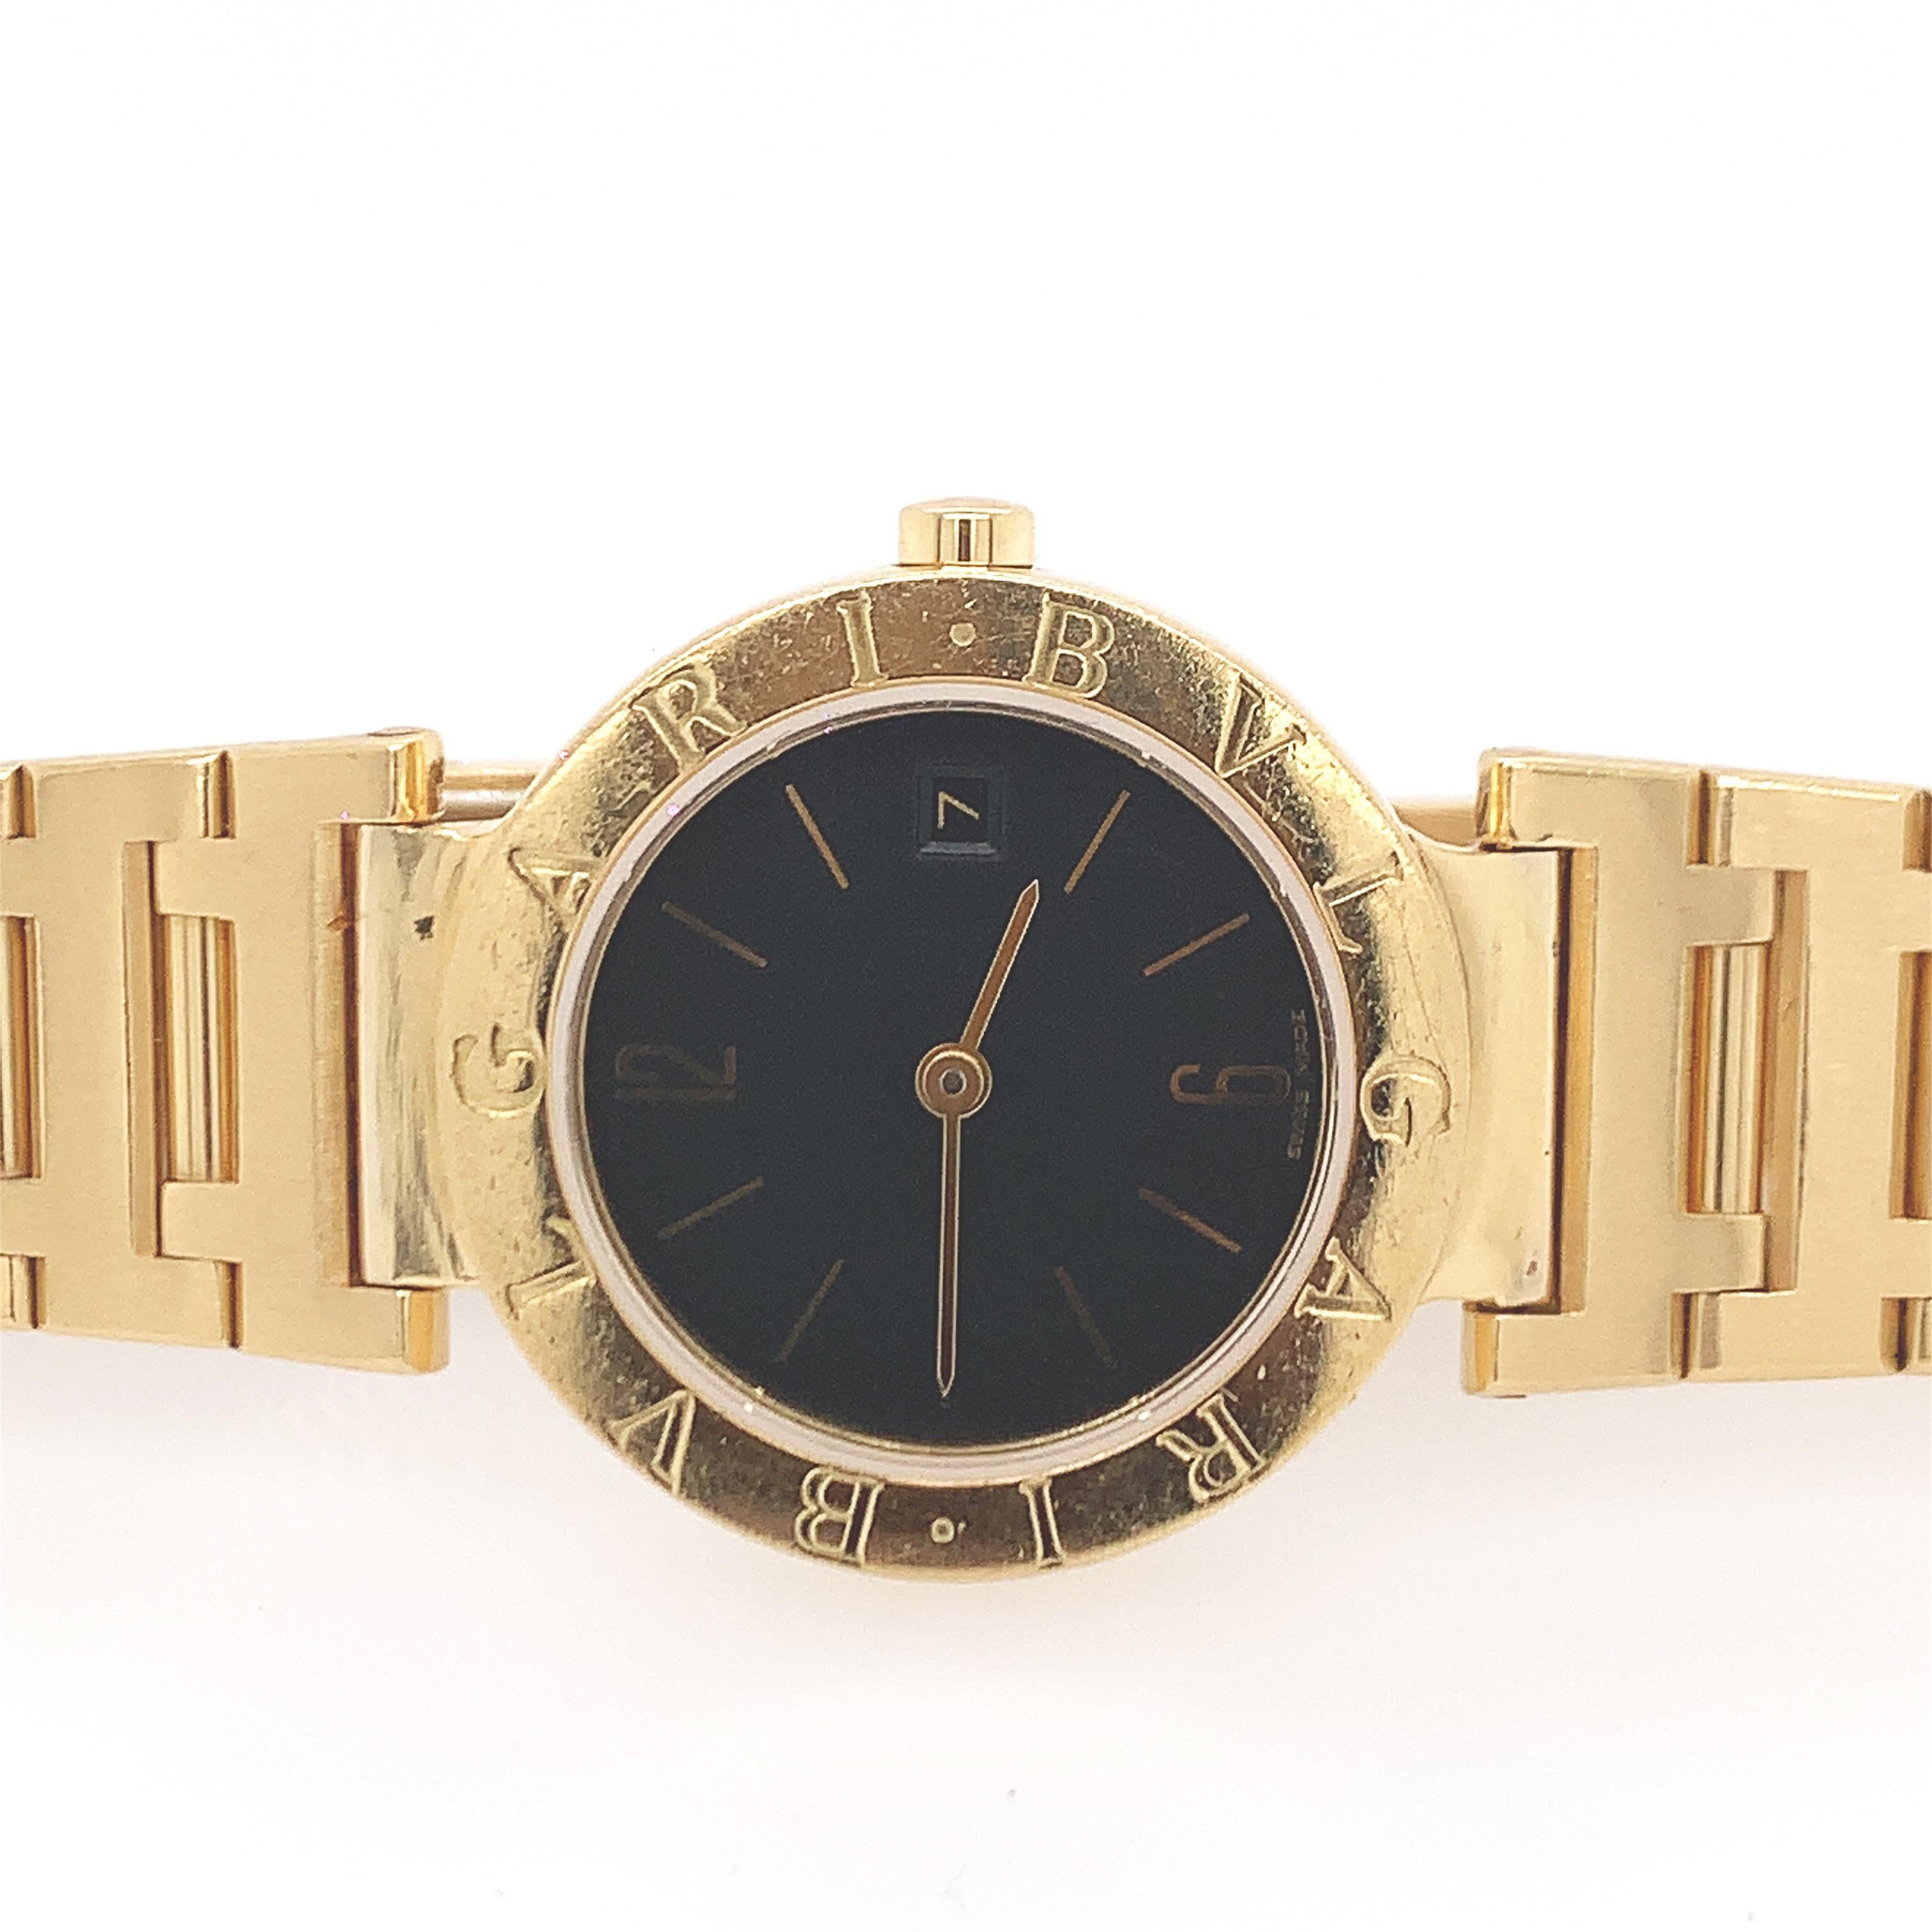 18K Y/gold watch, stamps VLGARI quartz BB26 GGD F37662, inner circumference 6 3/4 inches, weight  58.3 dwt.